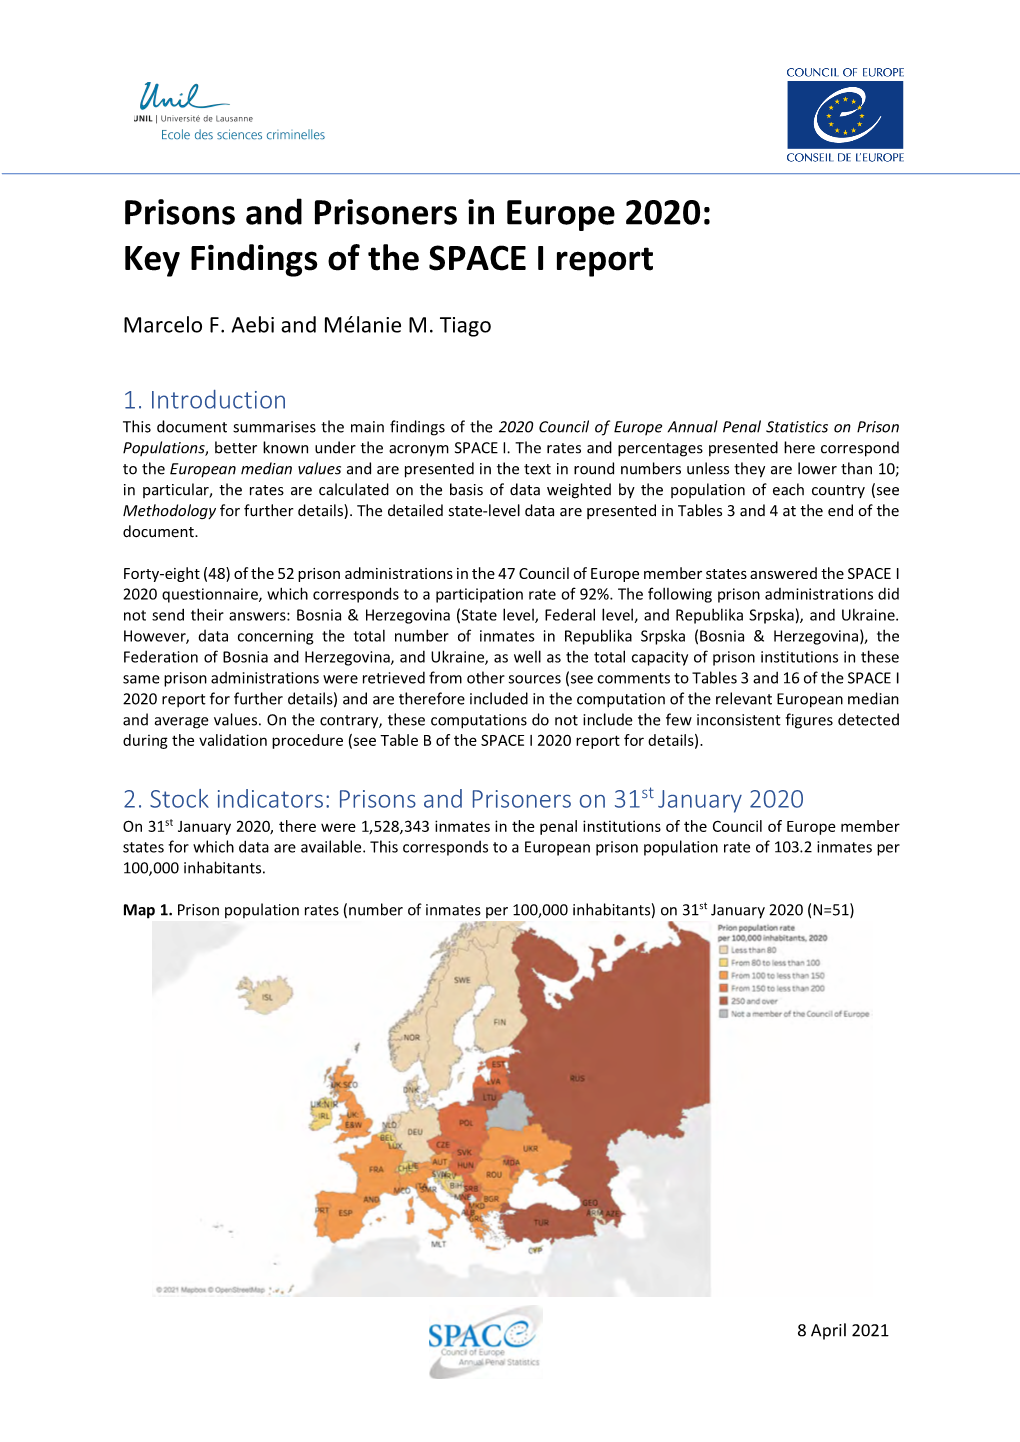 Prisons and Prisoners in Europe 2020: Key Findings of the SPACE I Report